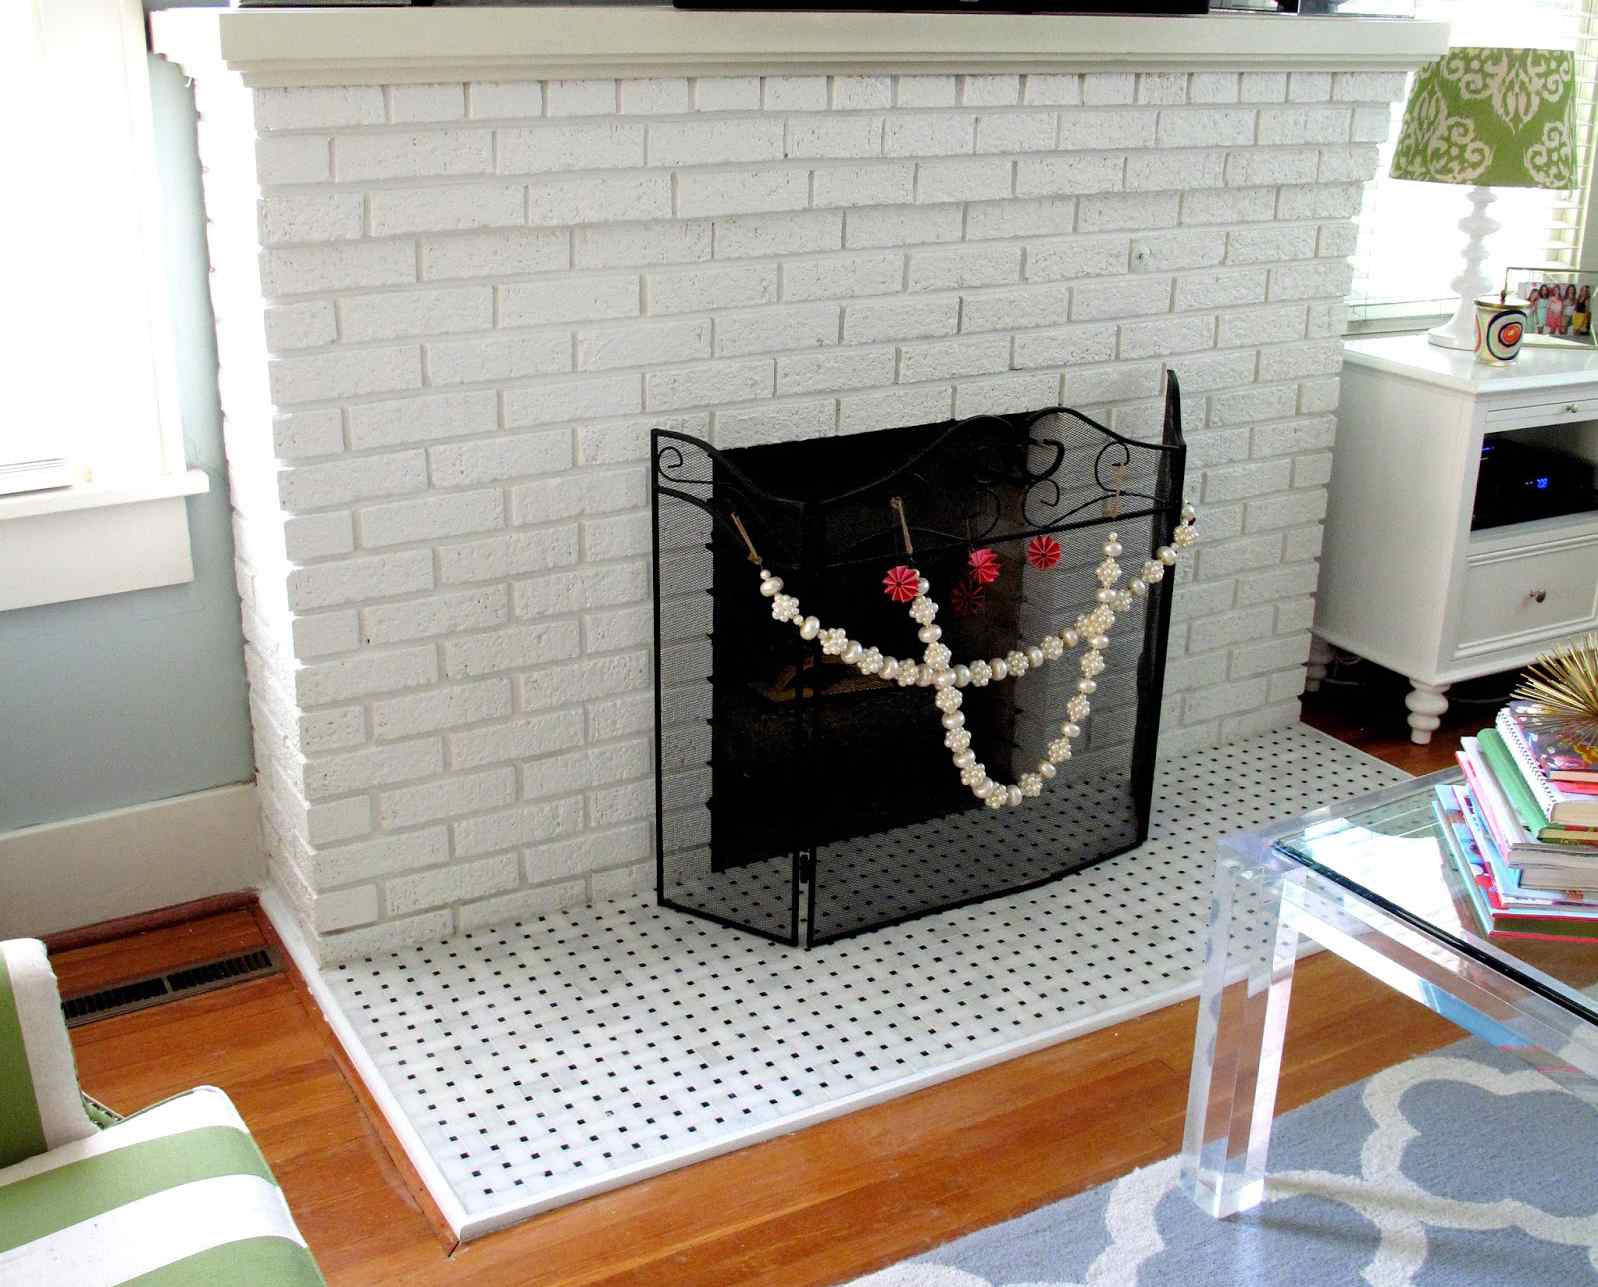 Craigslist Electric Fireplaces for Sale Beautiful 25 Beautifully Tiled Fireplaces